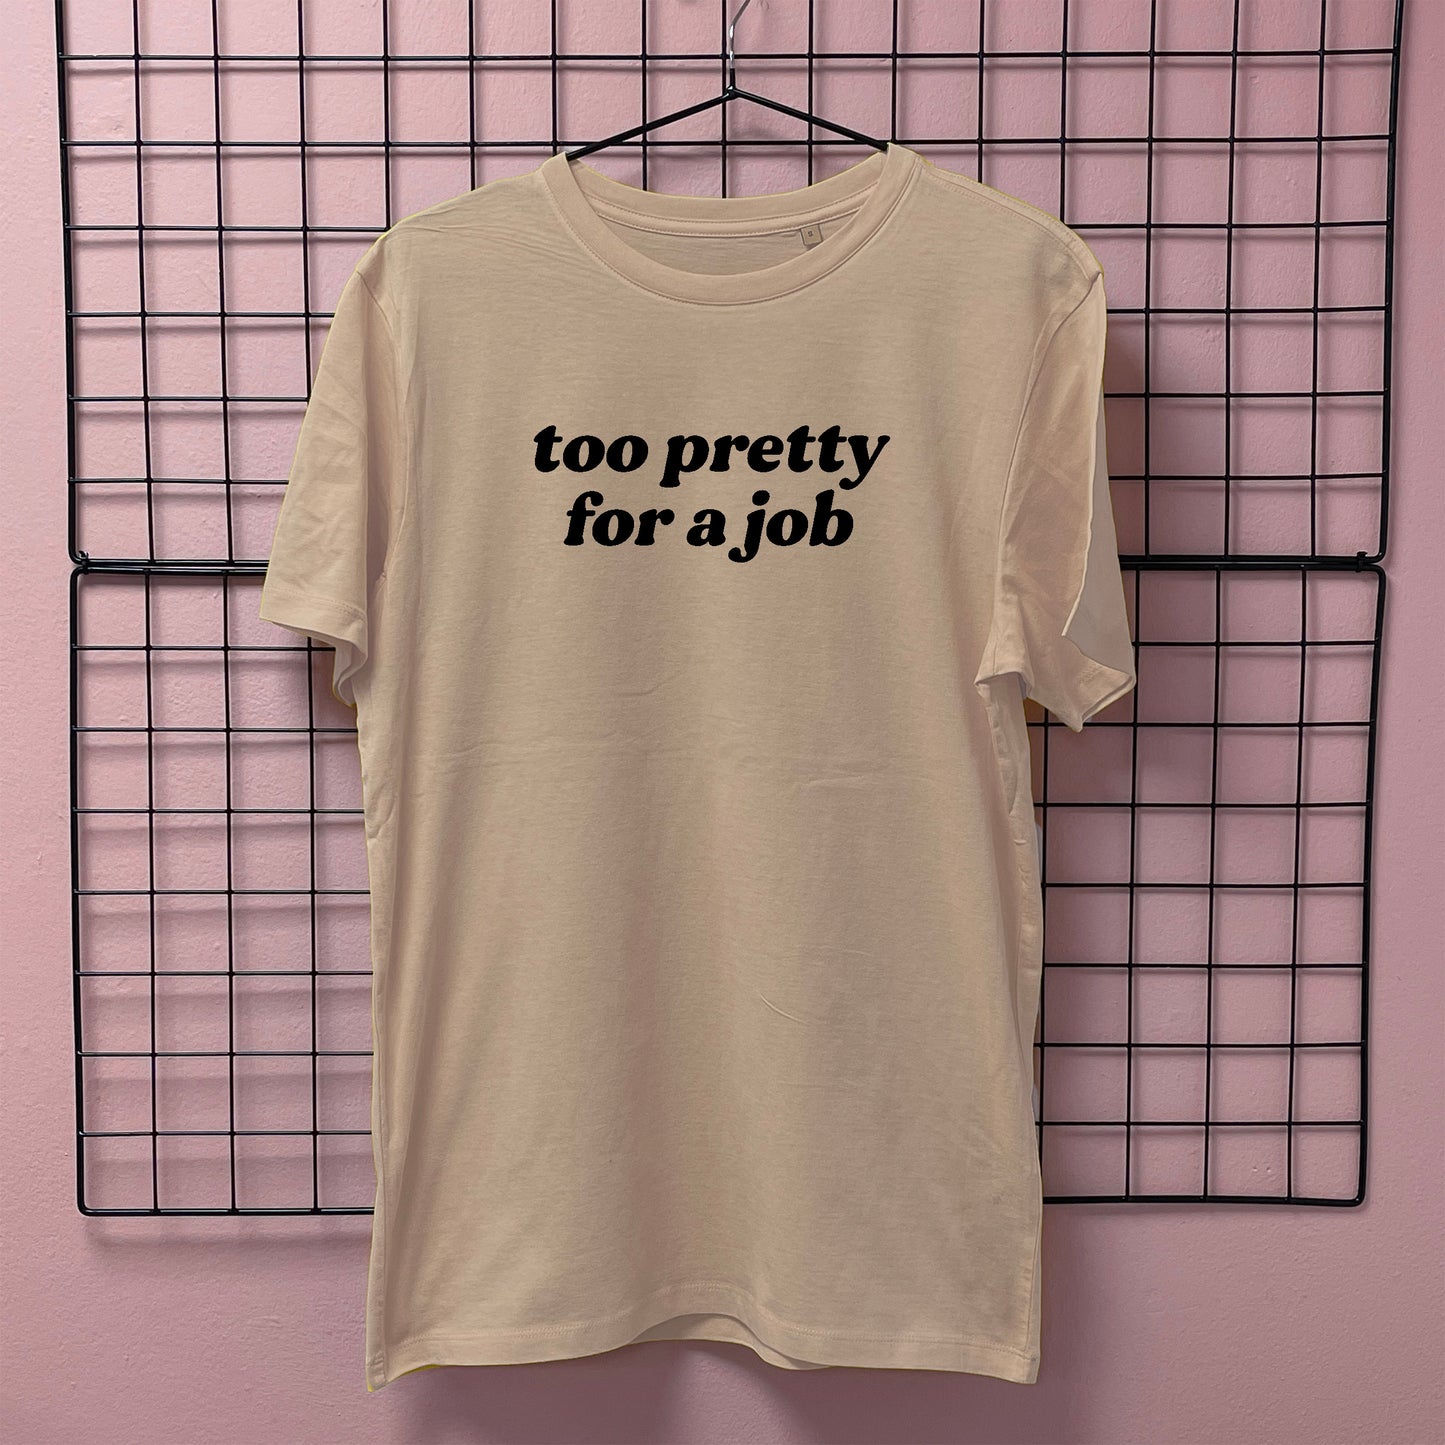 TOO PRETTY FOR A JOB T-SHIRT